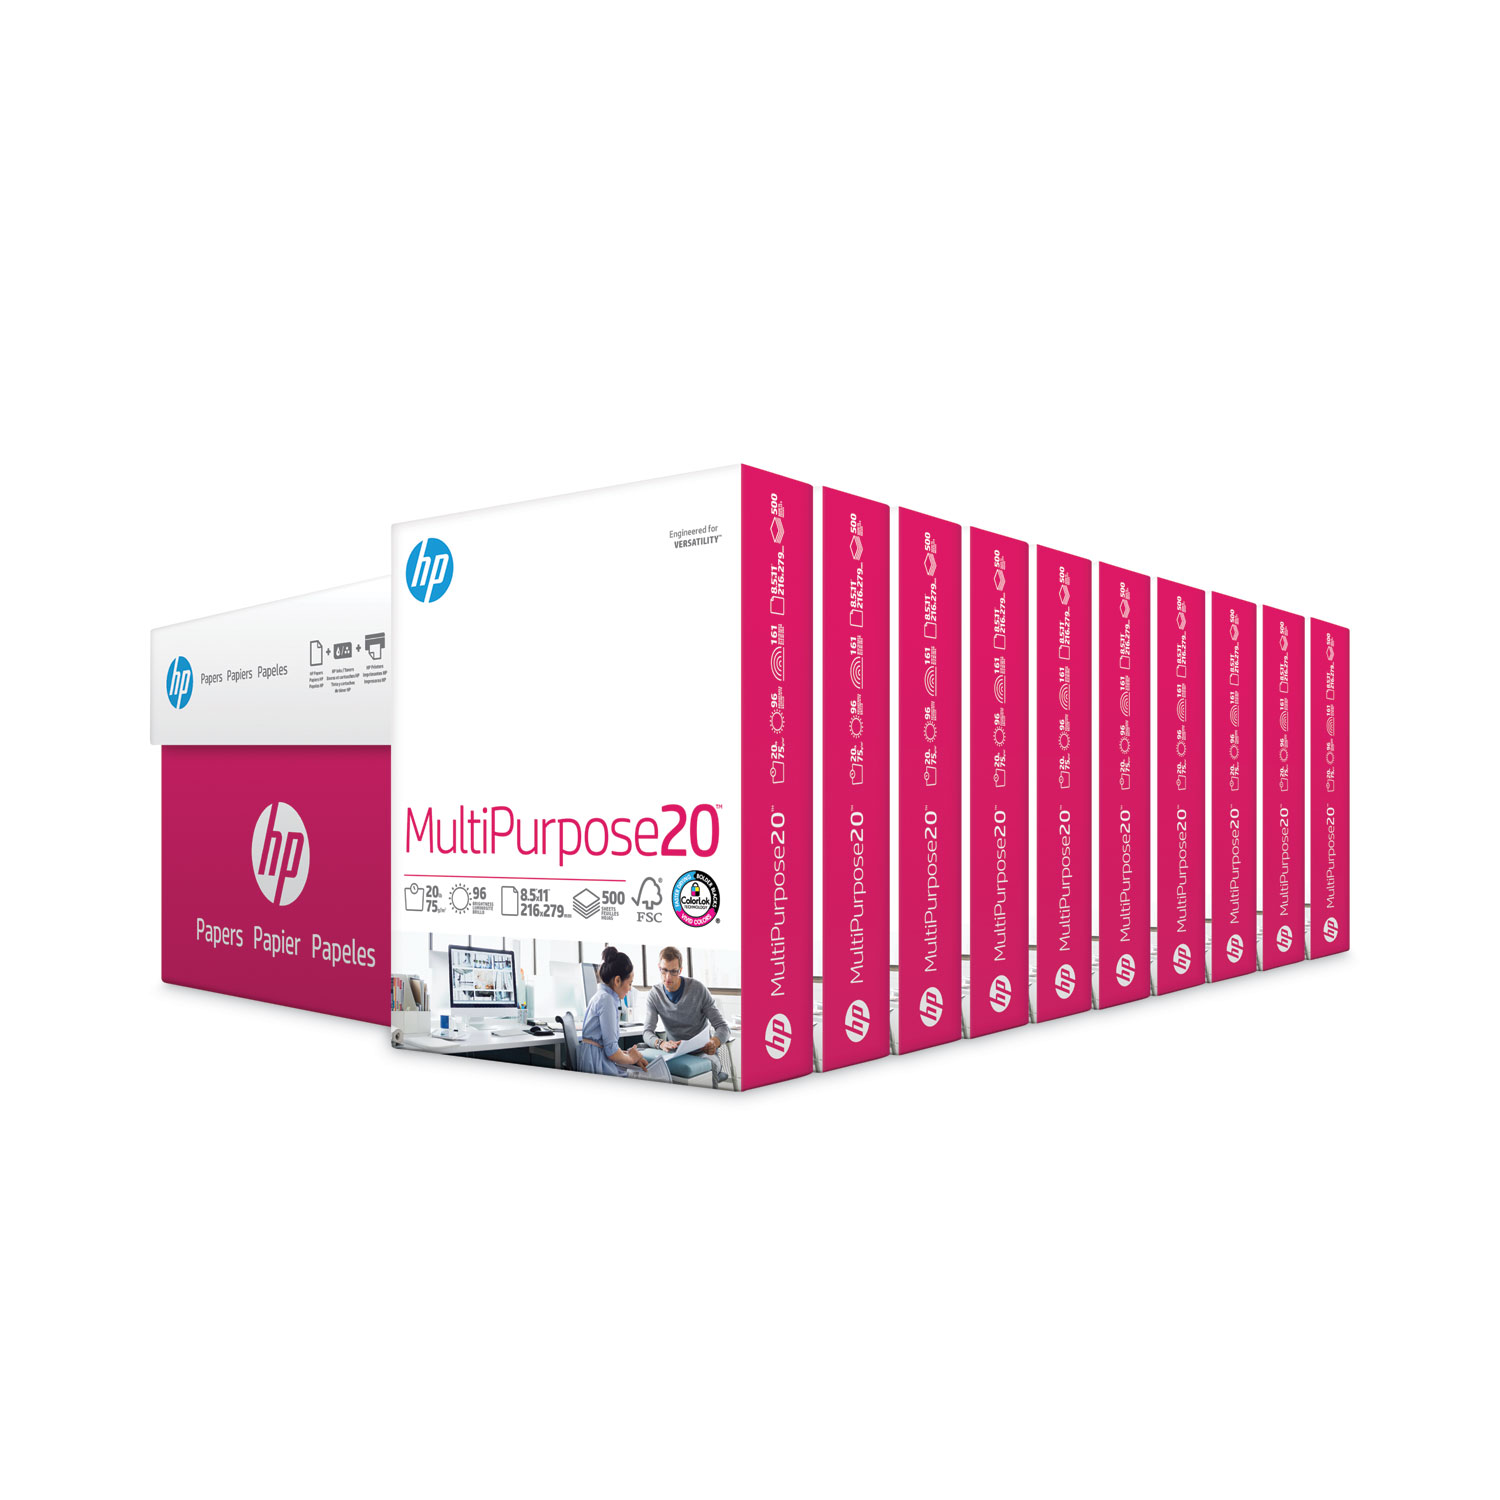 Colors Print Paper, 20 lb Bond Weight, 8.5 x 11, Pink, 500/Ream - Office  Source 360